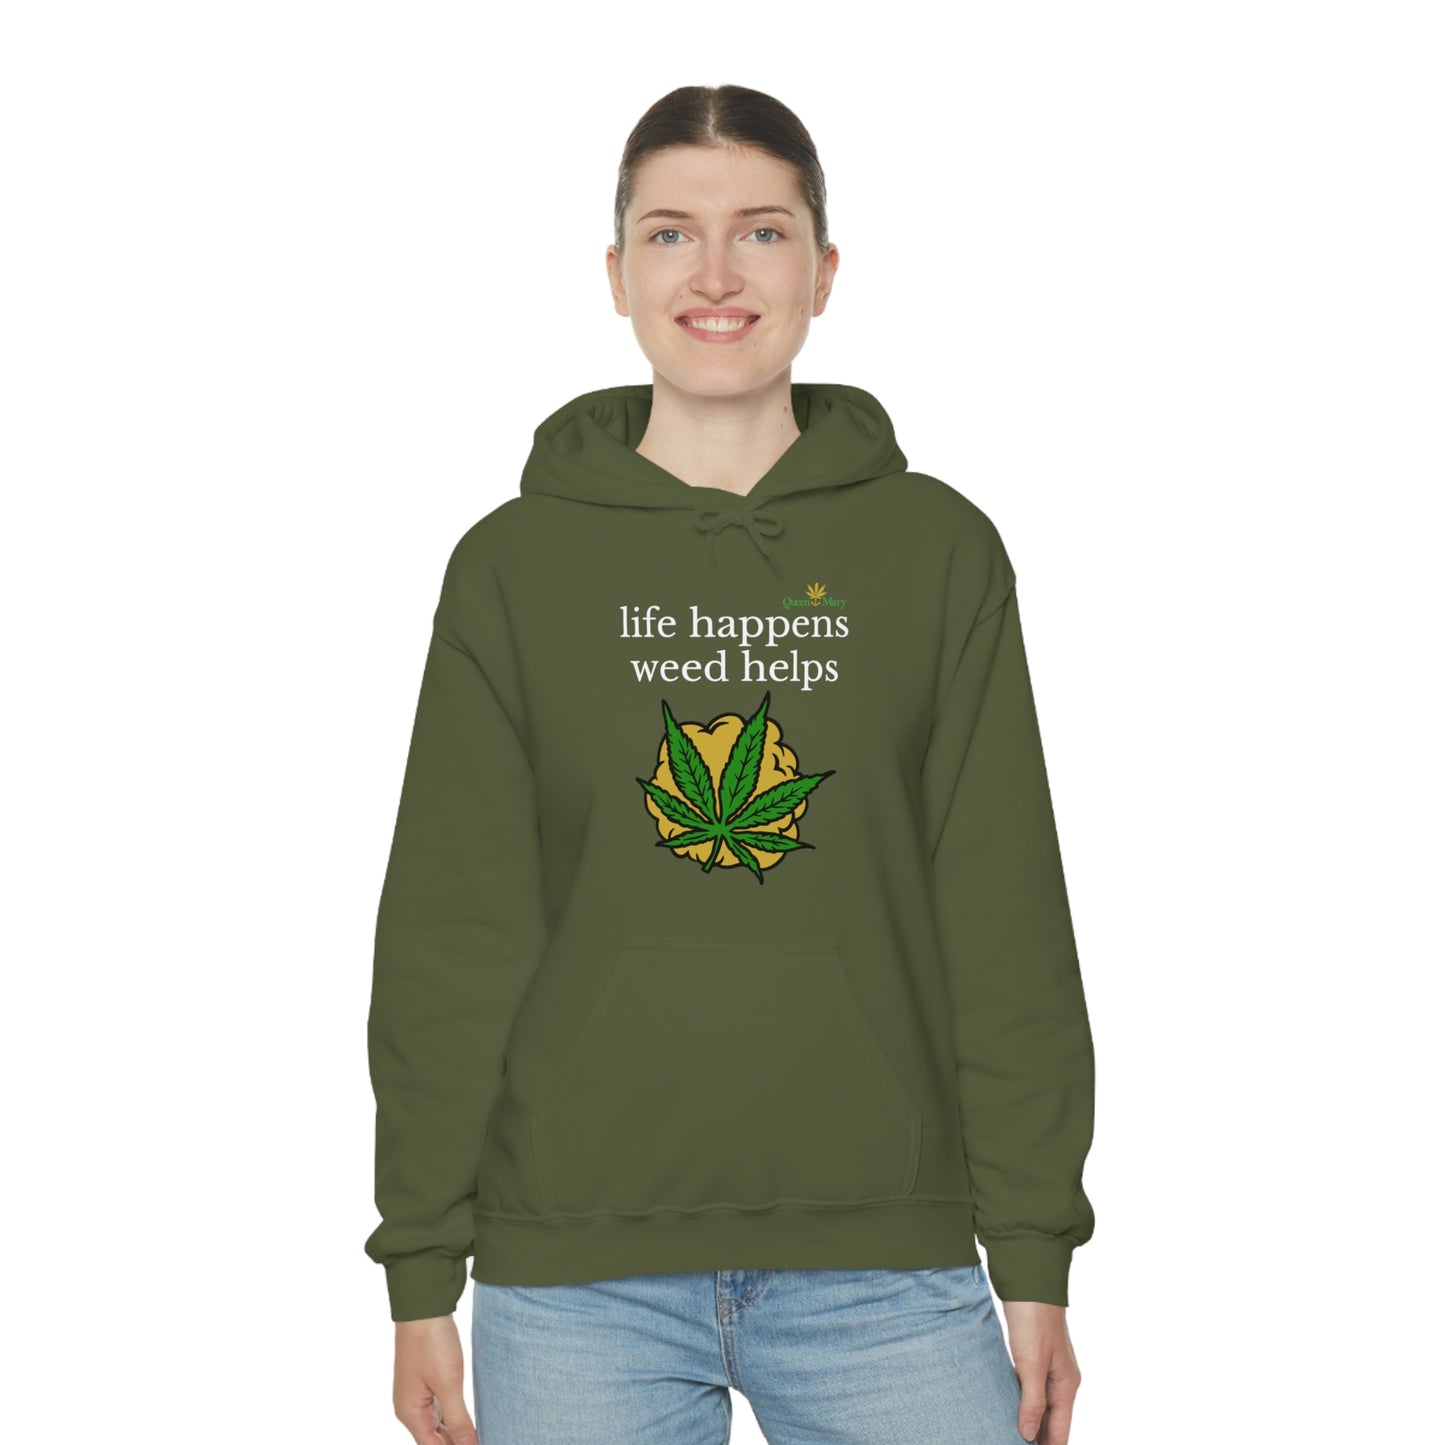 Hooded Sweatshirt by Queen Mary